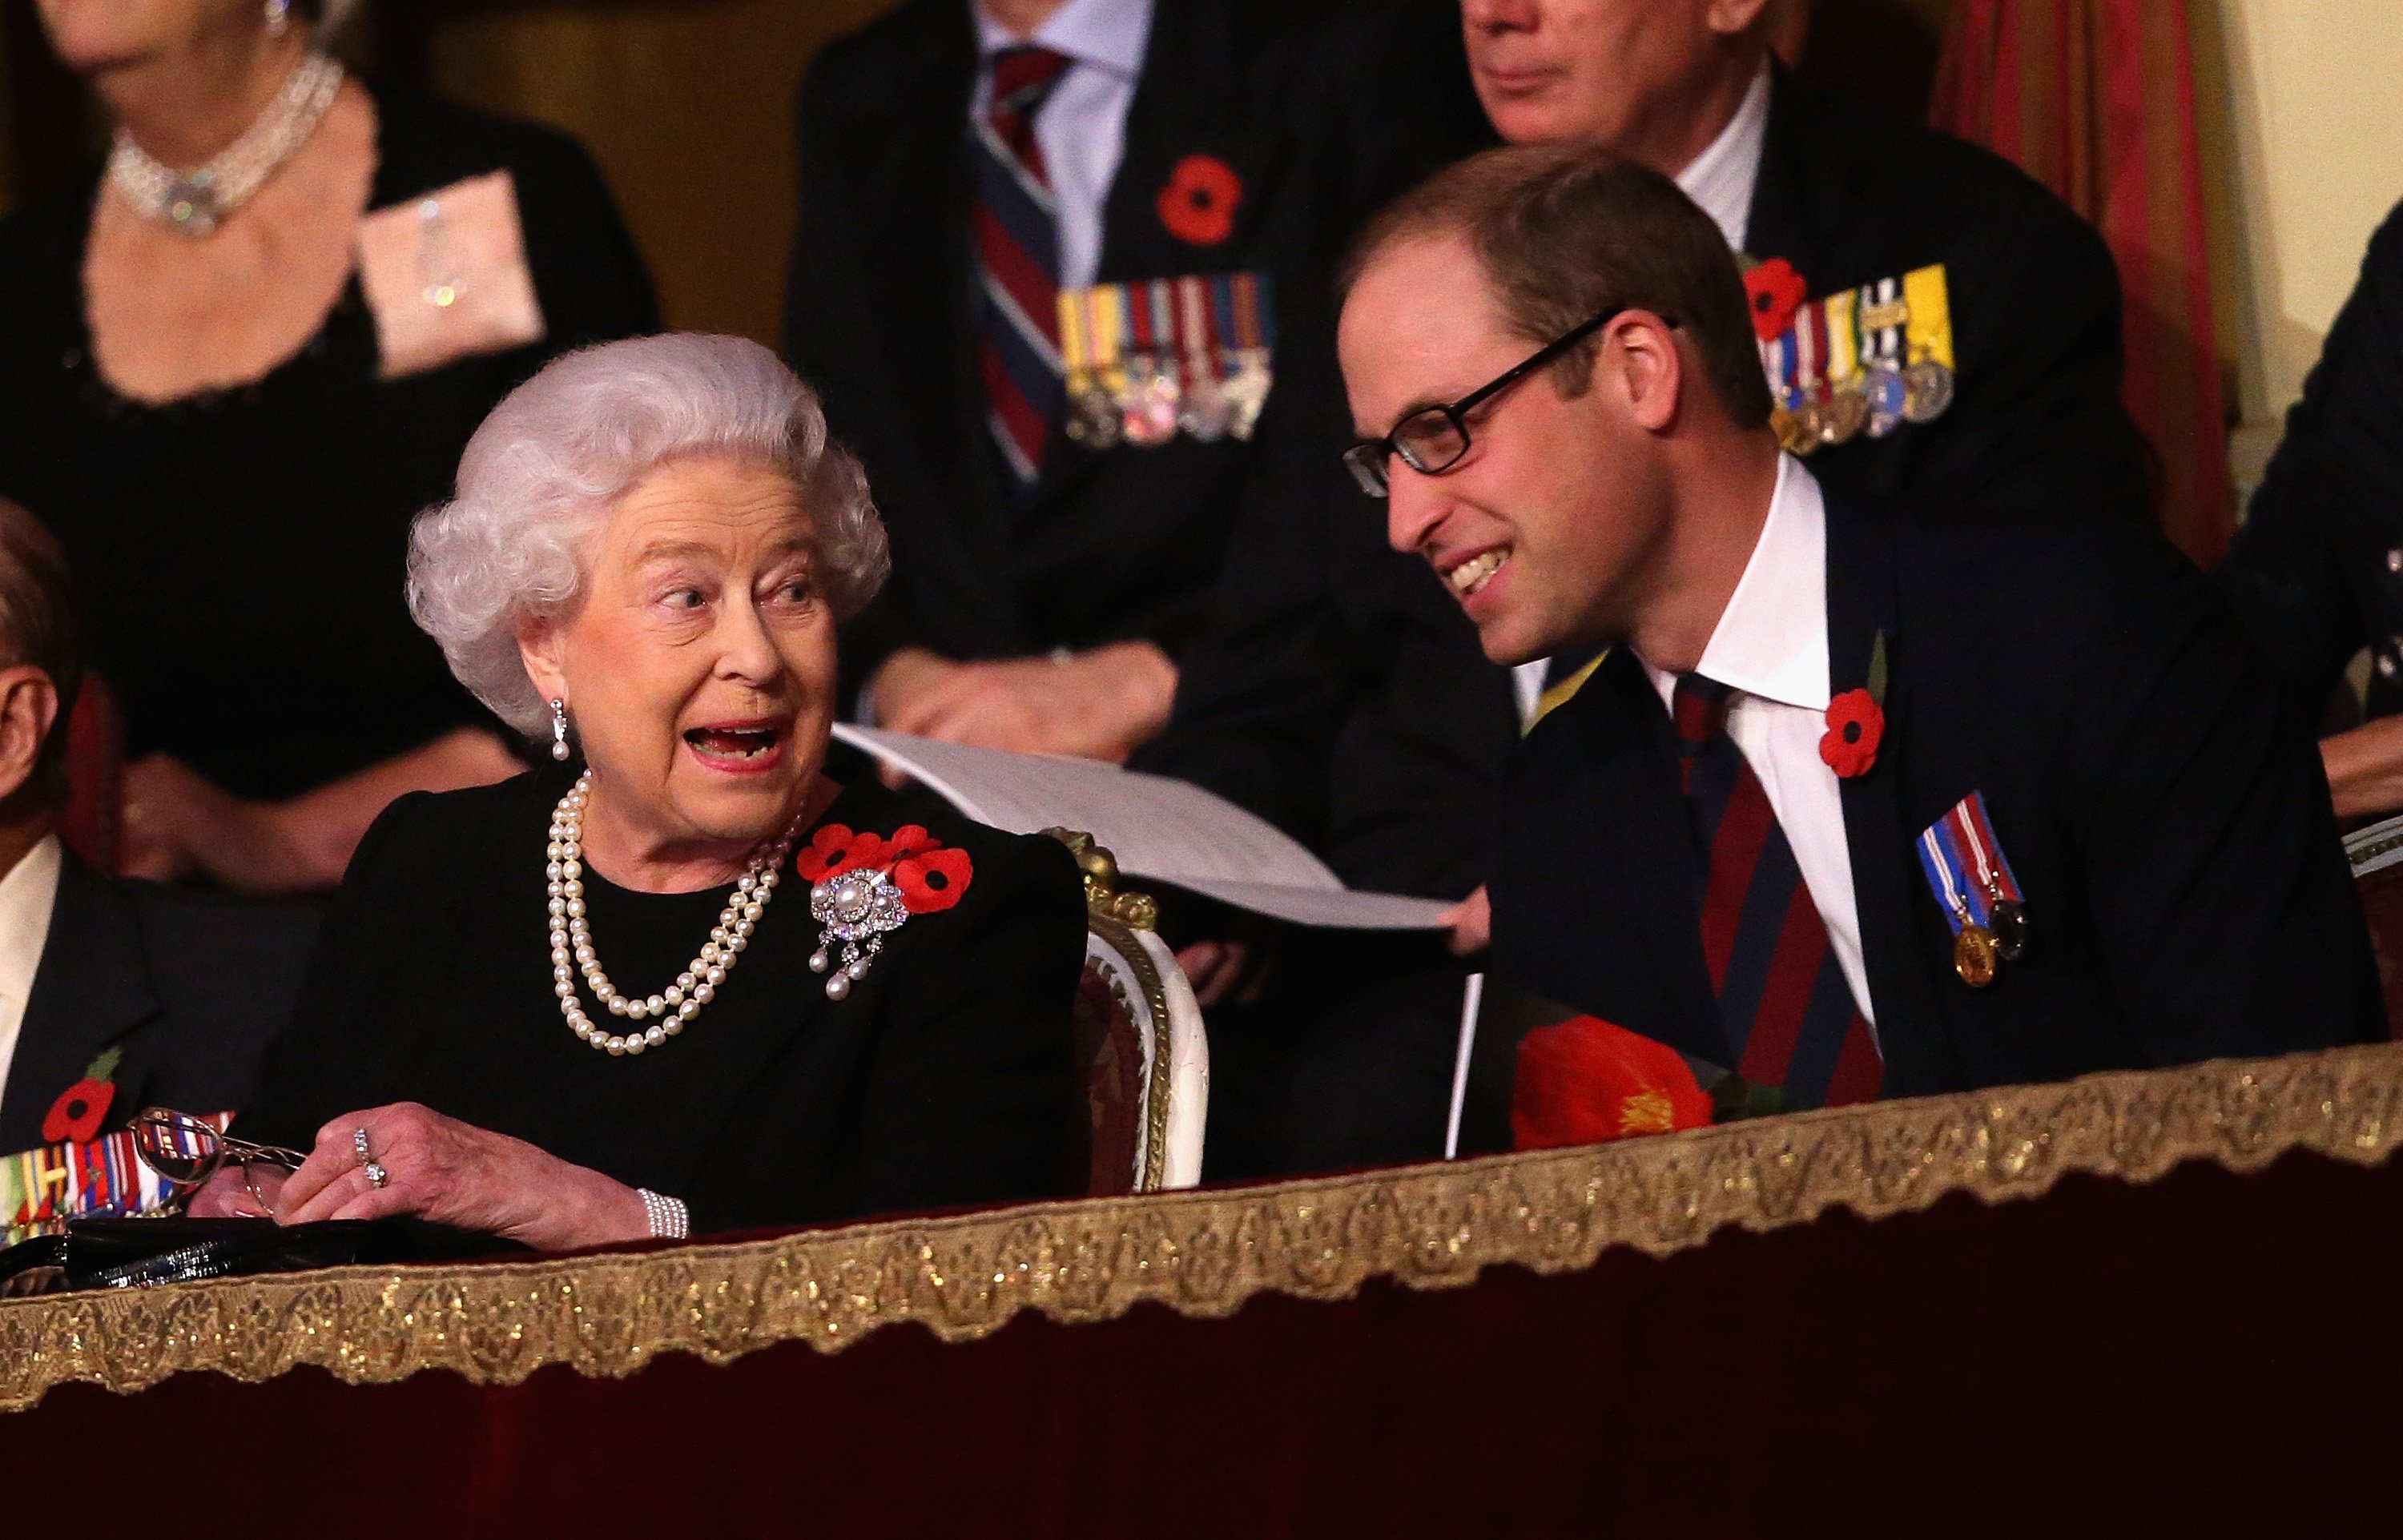 Queen Elizabeth II and Prince William pictured in the Royal Box at the Royal Albert Hall during the Annual Festival of Remembrance on November 7, 2015 in London, England ┃Source: Getty Images